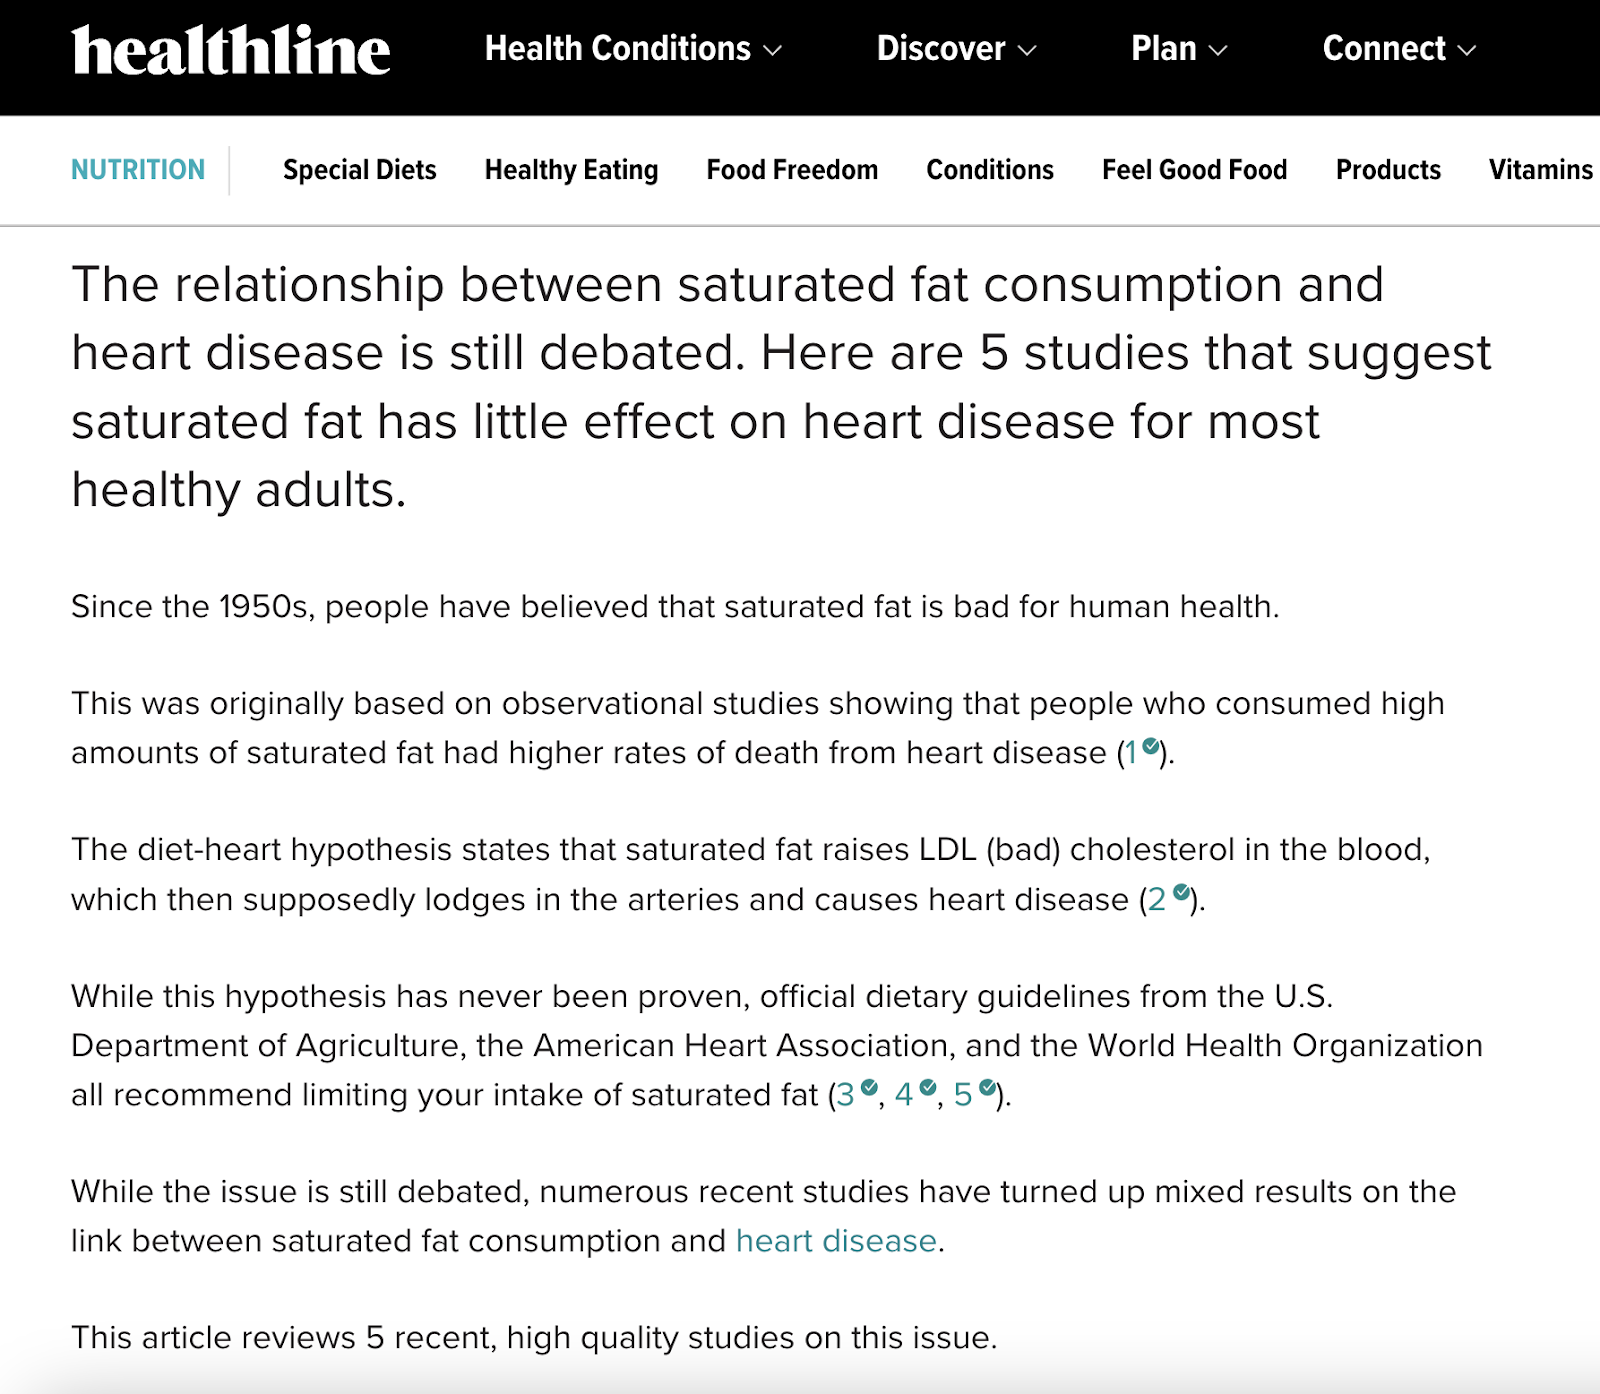 Healthline's article introduction gives a brief discussion about saturated ، and its impact on heart health